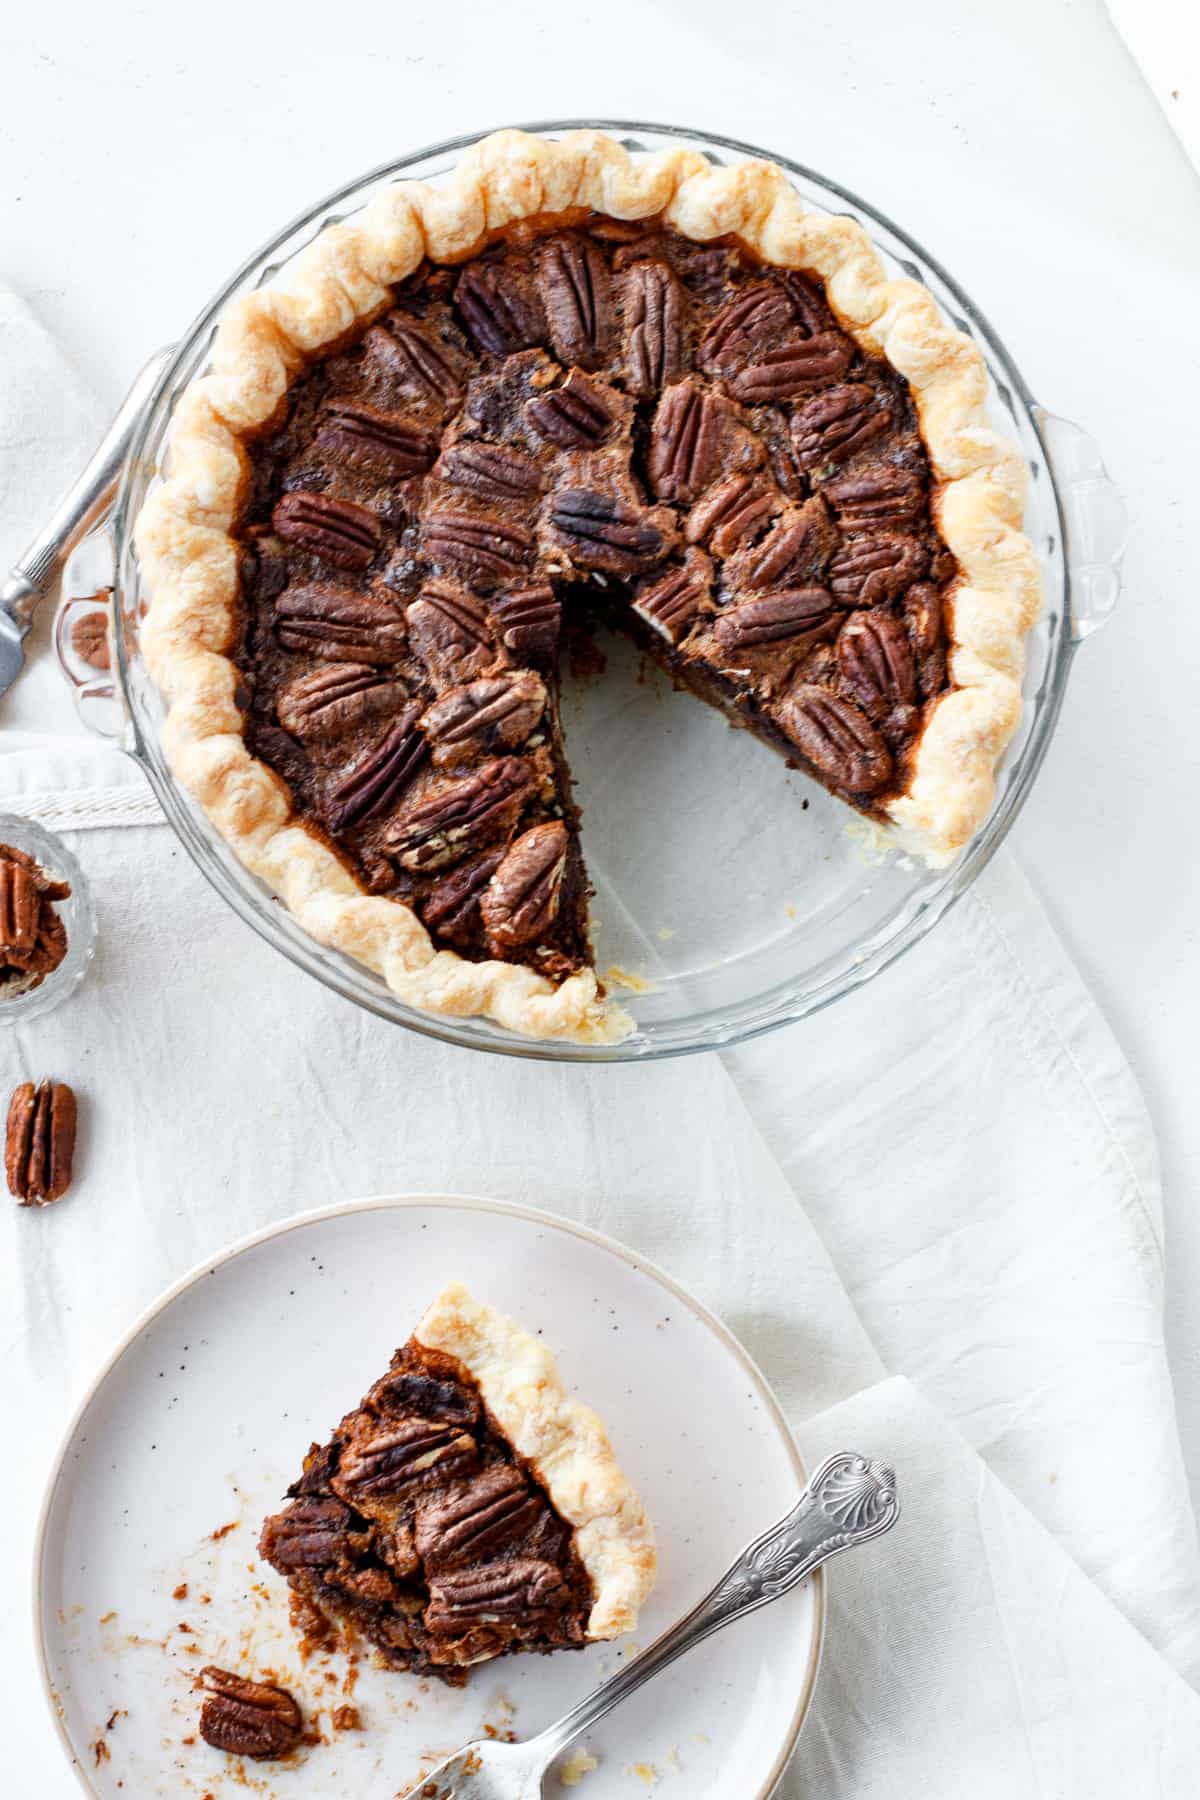 Aerial view of pecan pie in glass dish, slice on a plate with fork, white cloth and surface, loose pecans